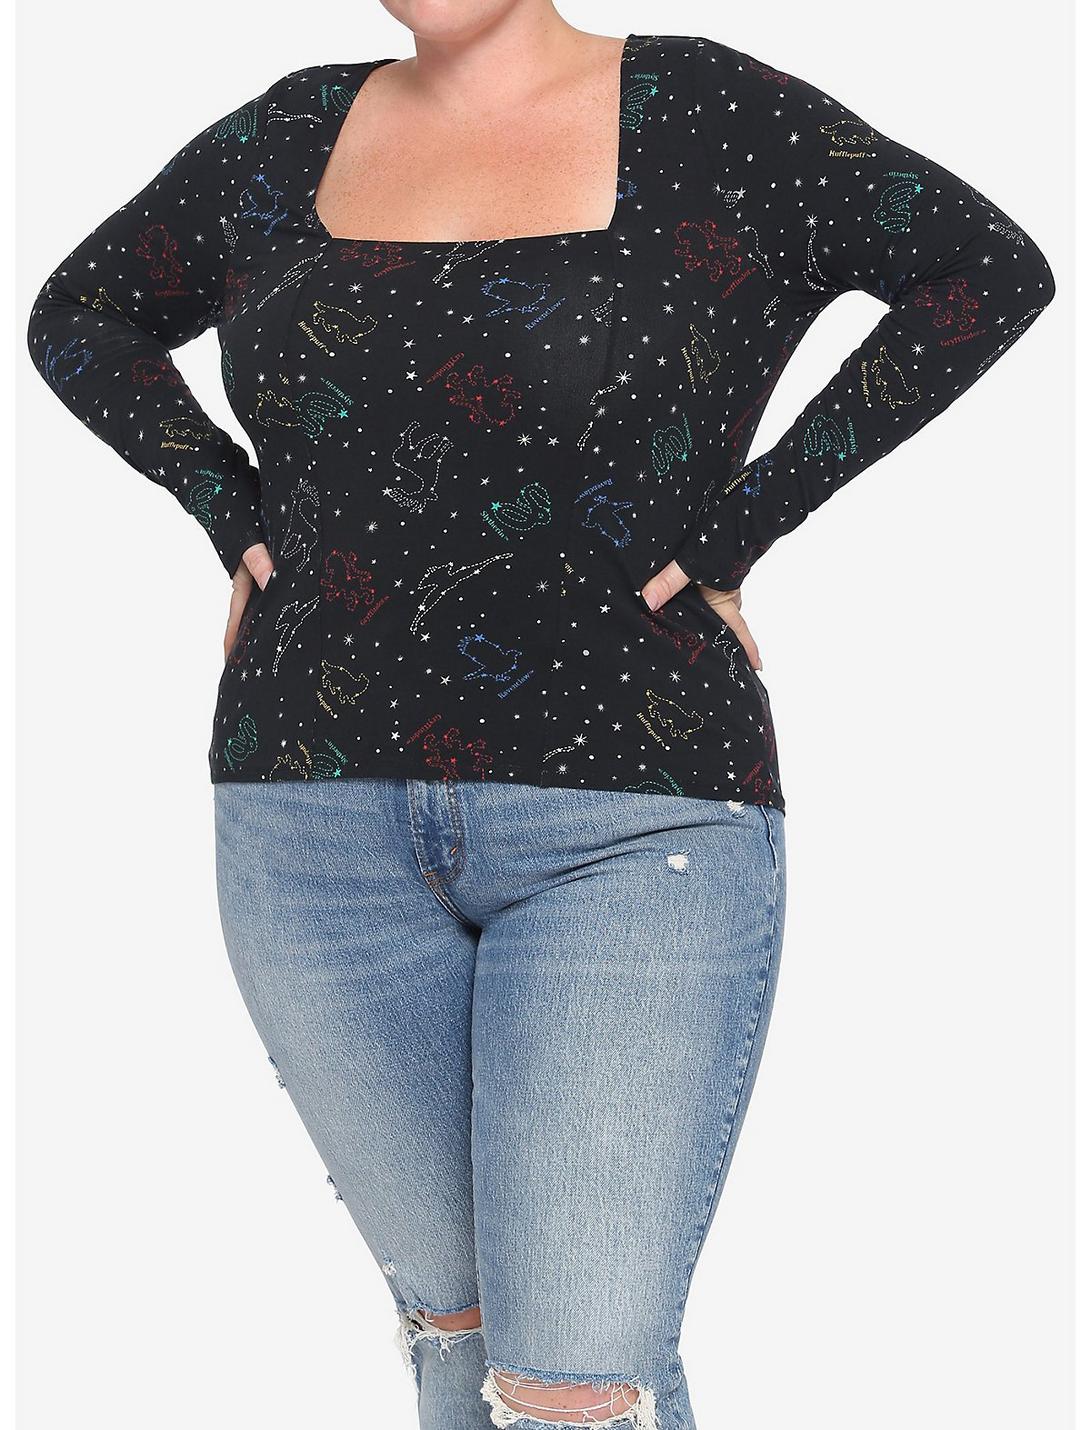 Harry Potter Constellation Long-Sleeve Top Plus Size, MULTI, hi-res